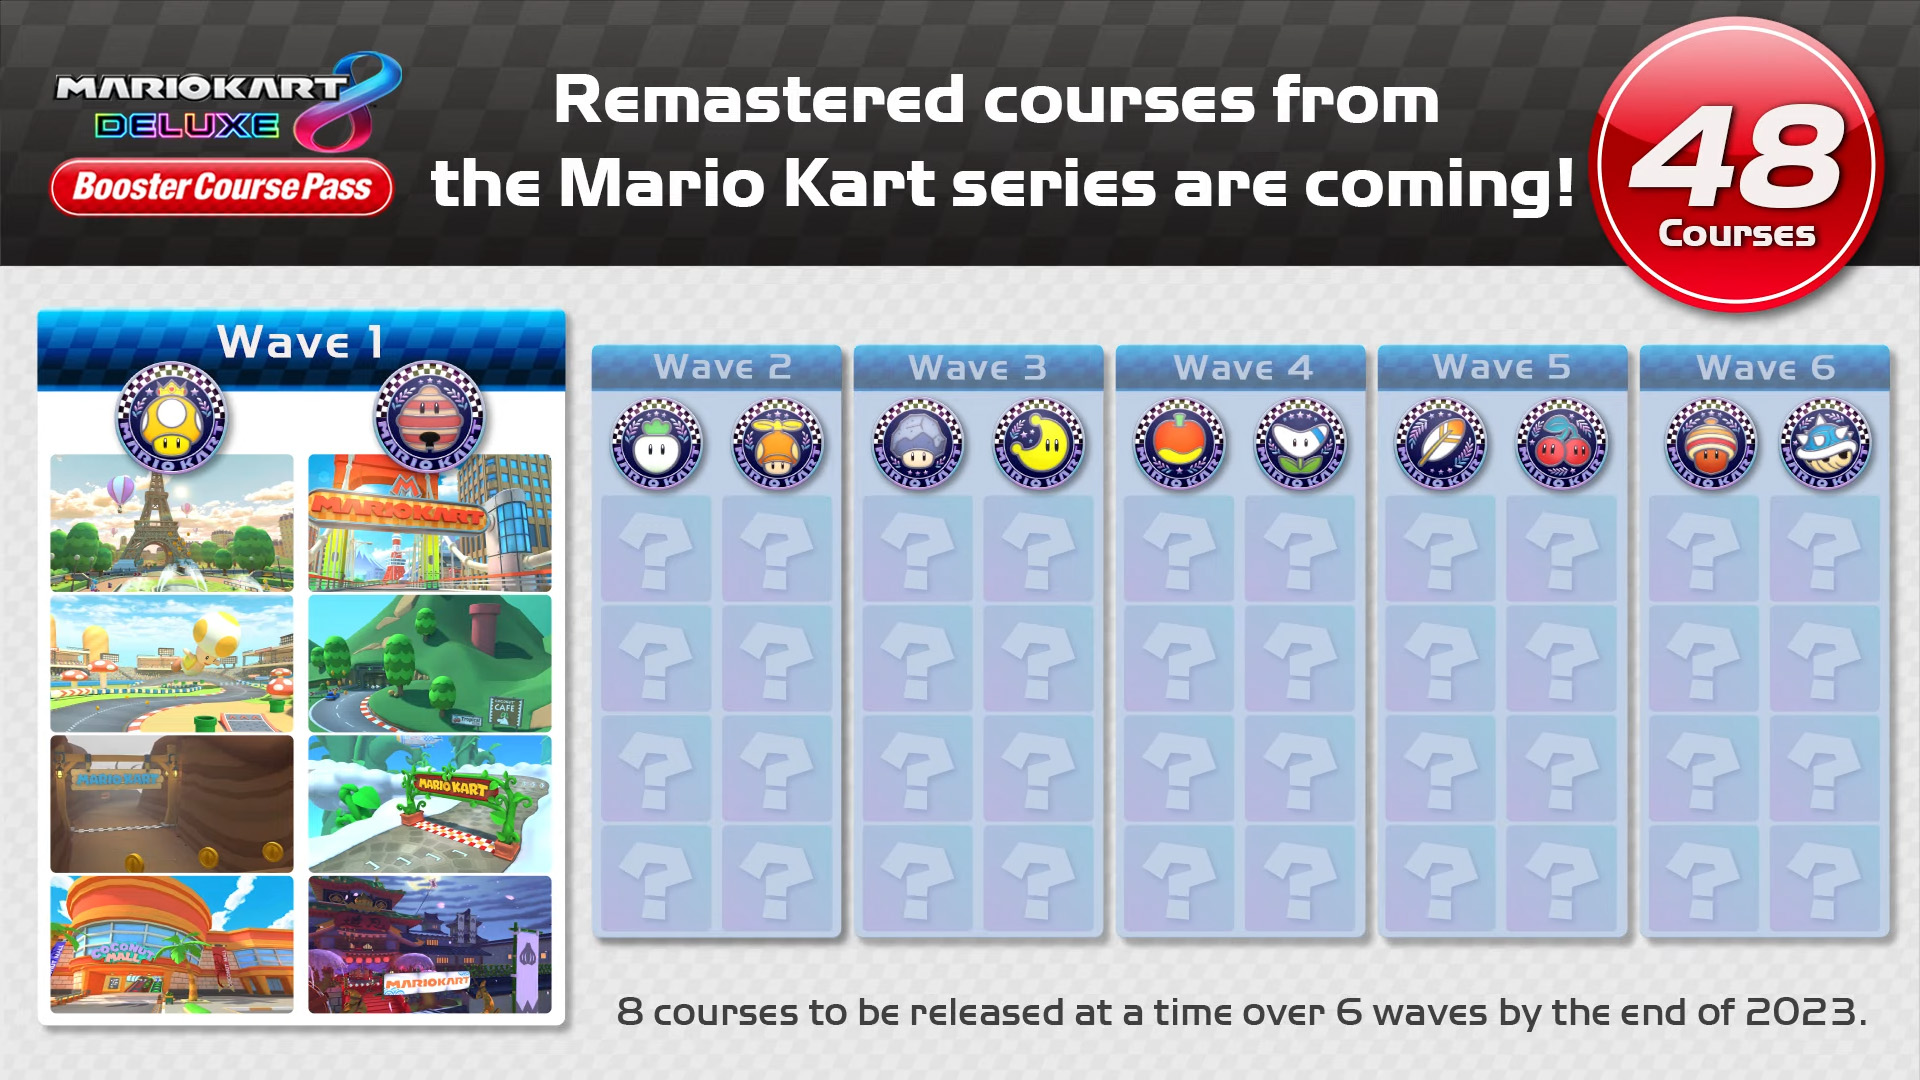 Mario Kart 8 Deluxe Booster Pass (Wave 1) can be played in multiplayer